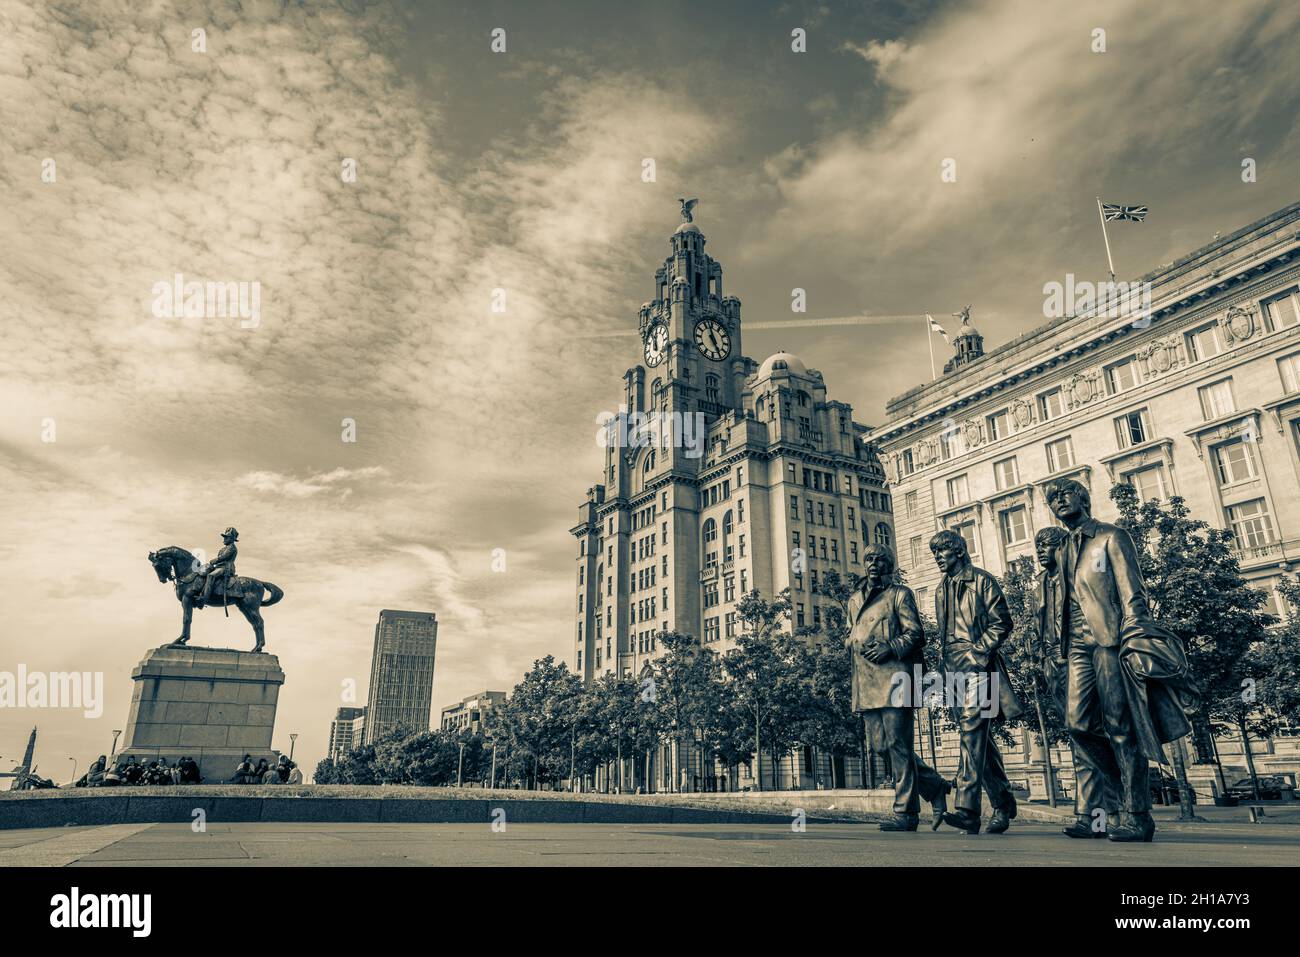 The Beetles at Liverpool waterfront in front of the Three Graces - the Royal Liver Building, The Cunard Building and the Port of Liverpool Building. Stock Photo